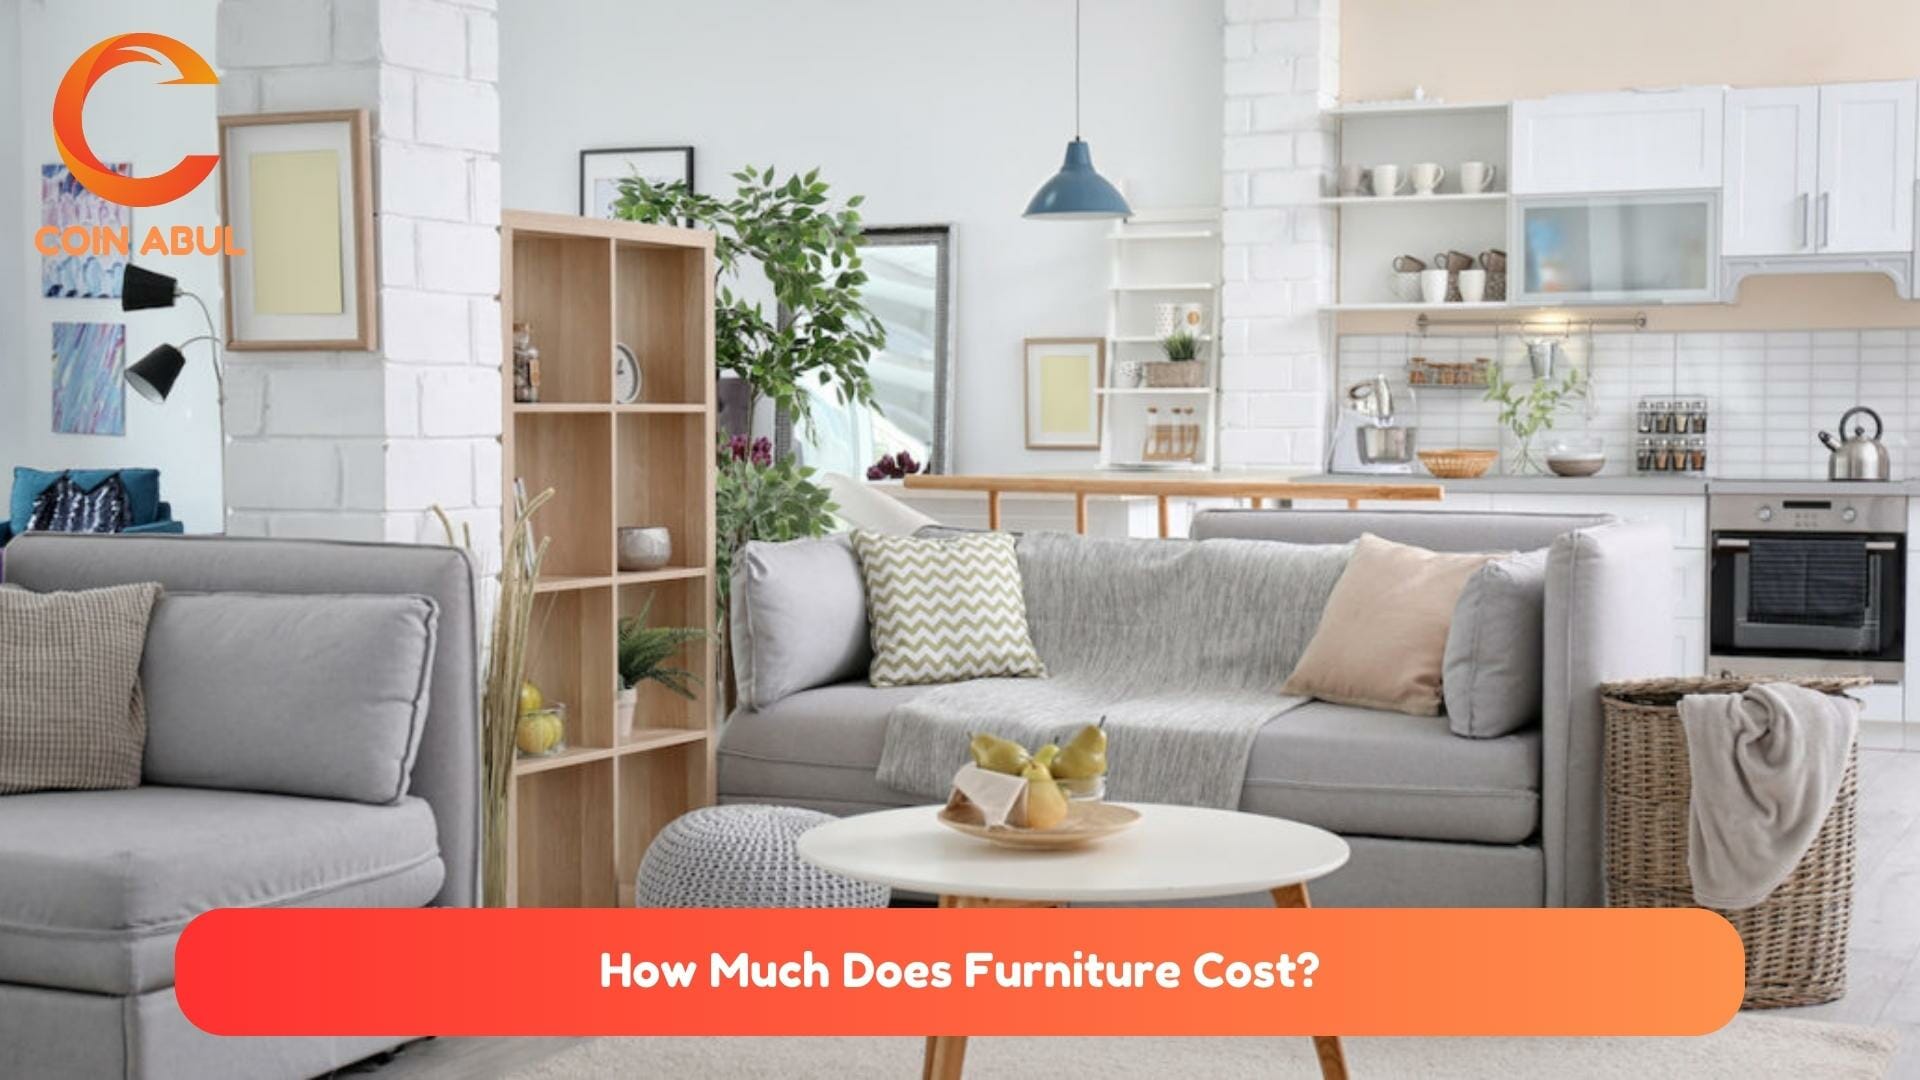 How Much Does Furniture Cost